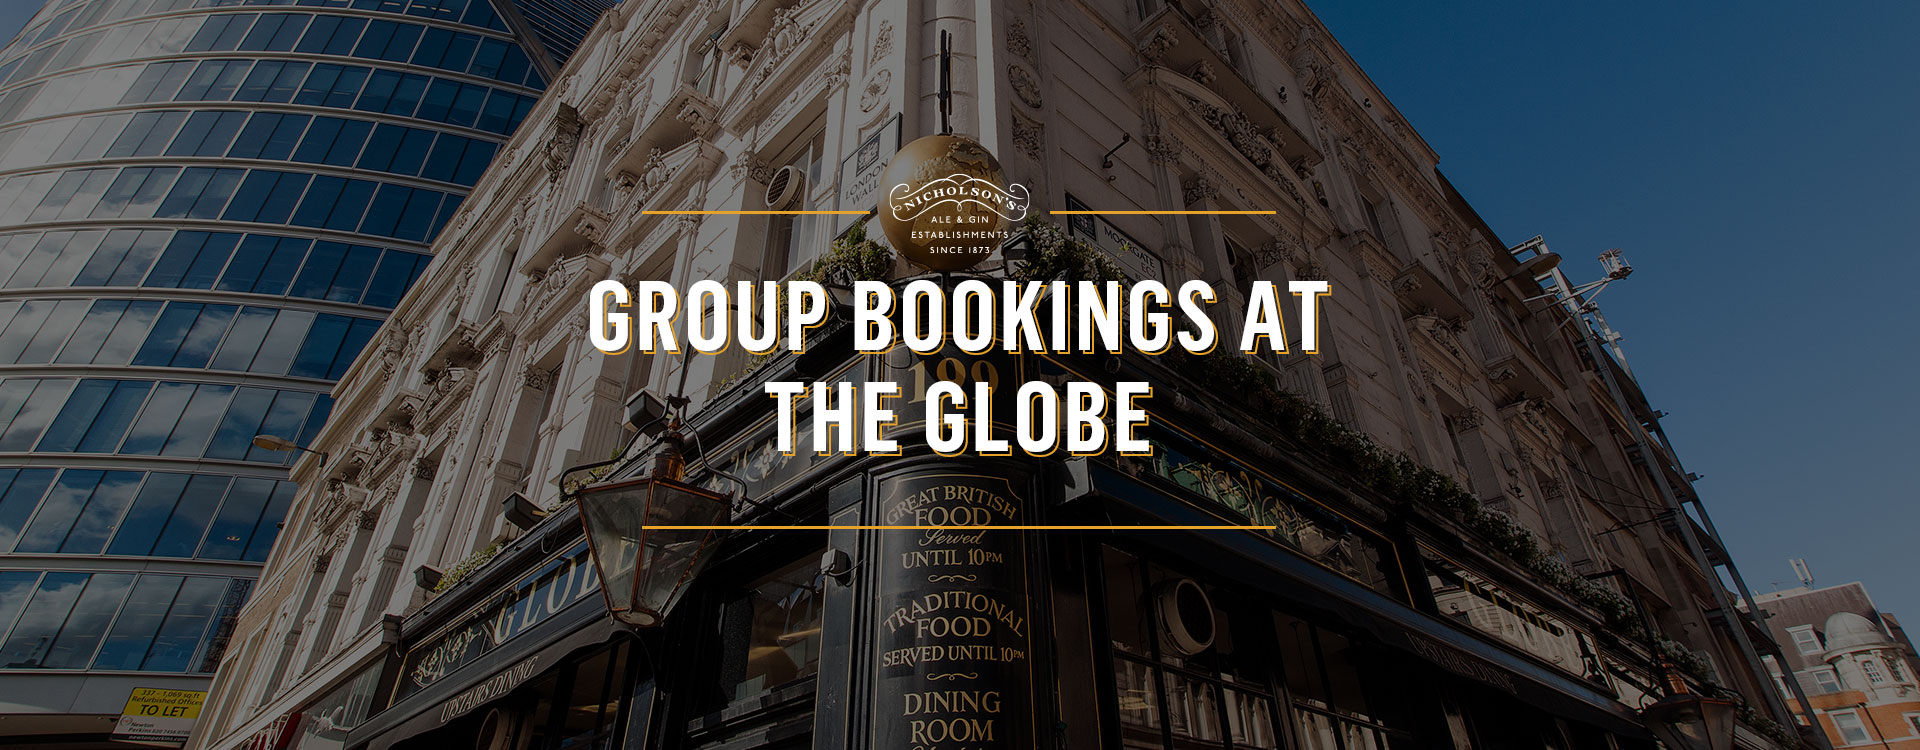 Group Bookings at The Globe